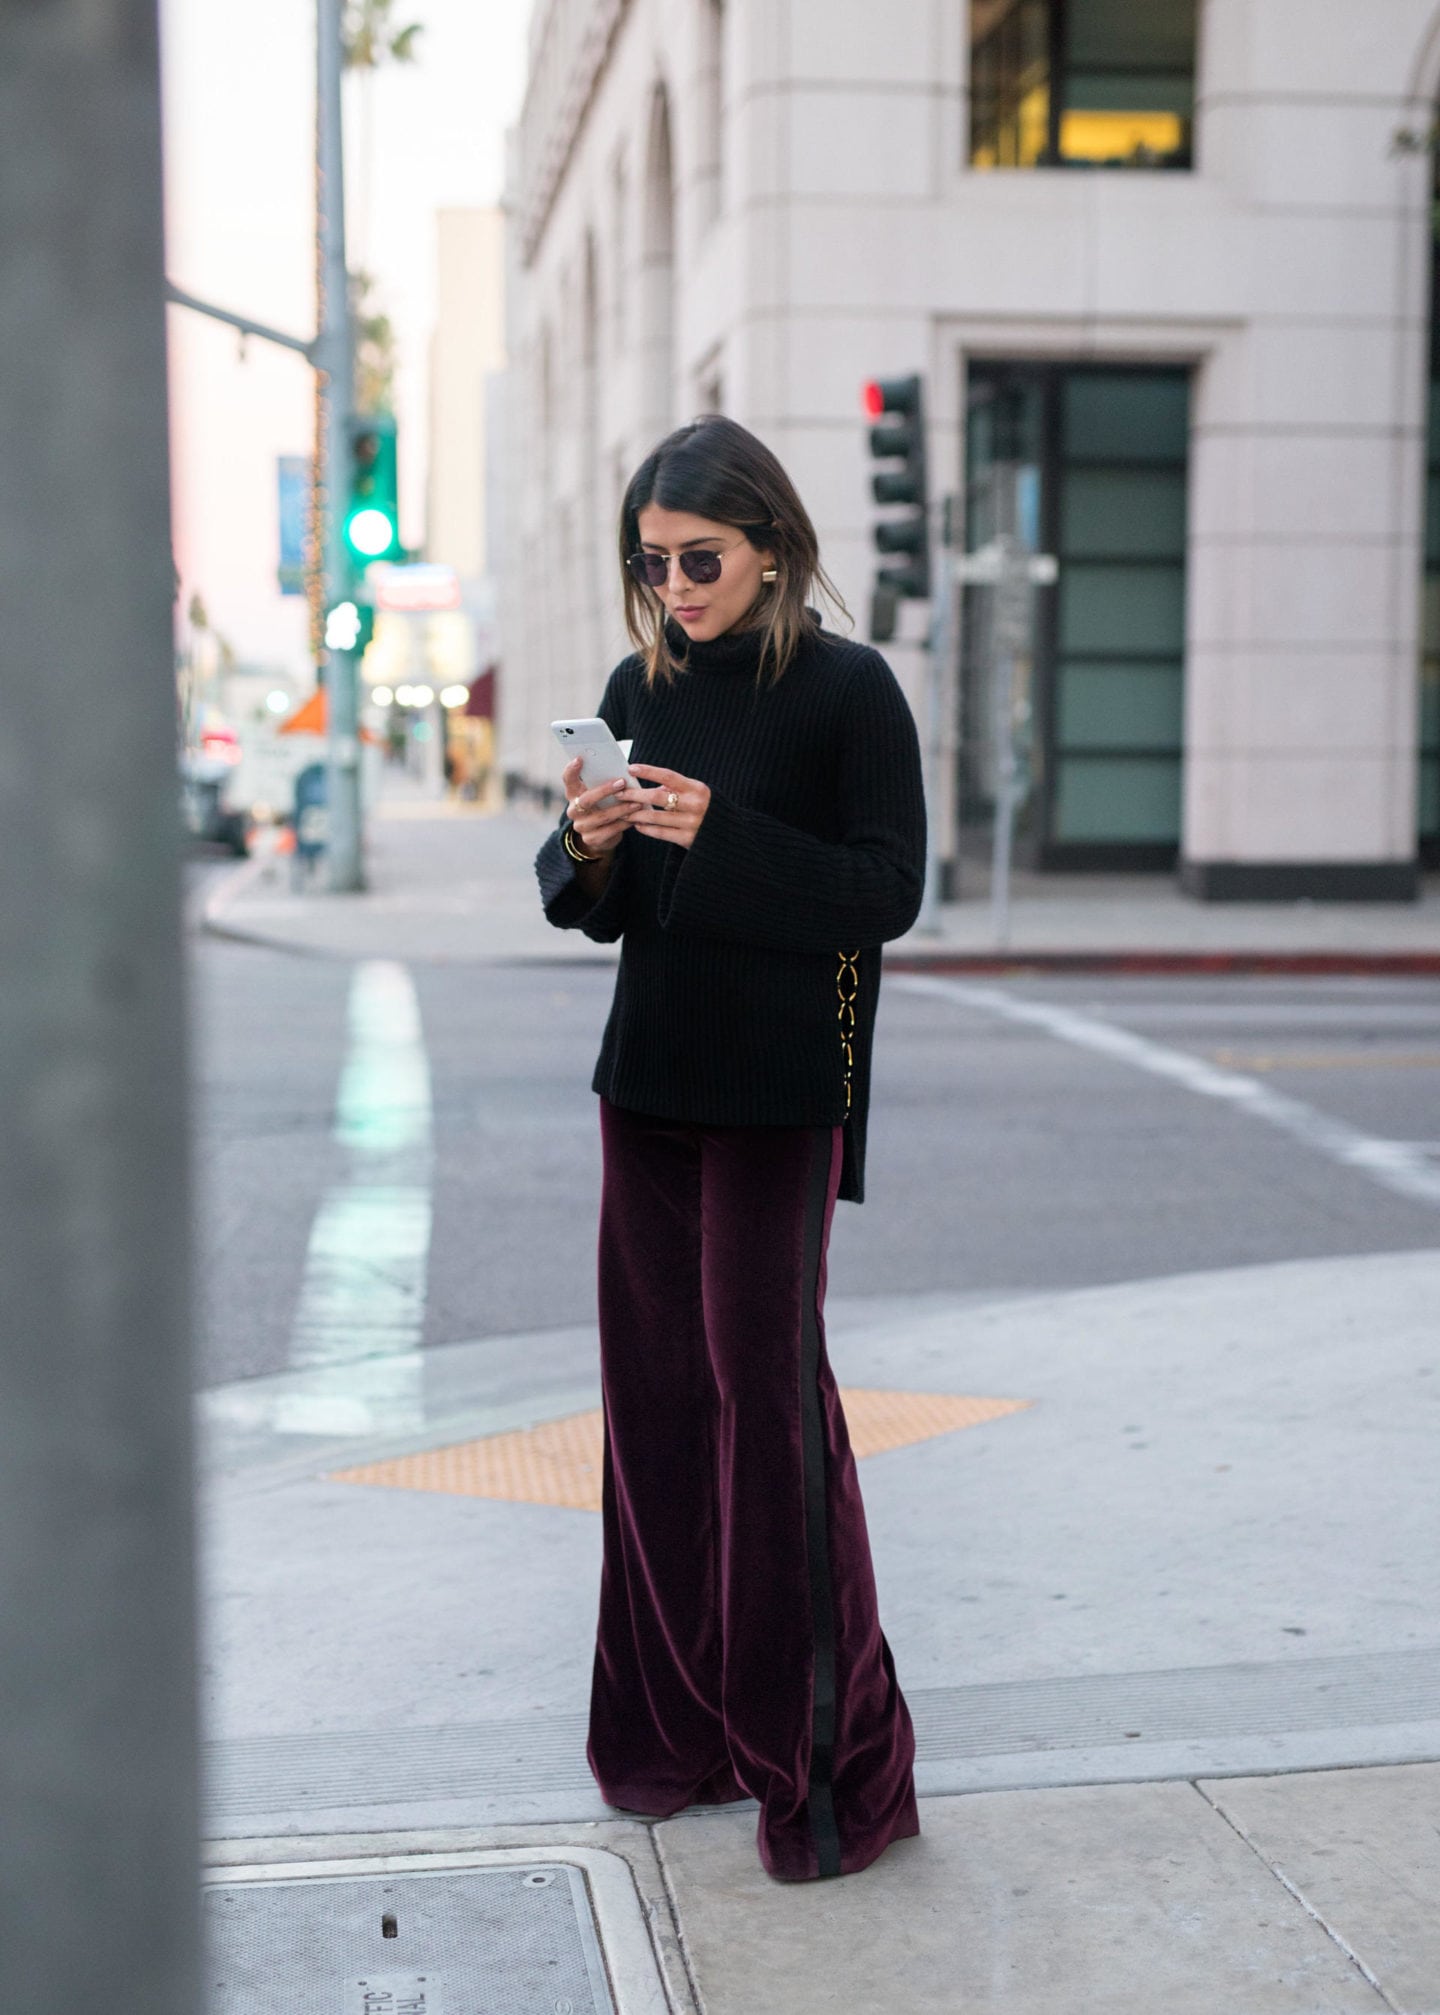 Pam Hetlinger of the fashion, beauty, lifestyle, and travel blog, The Girl From Panama, styles velvet pants and a turtleneck sweater